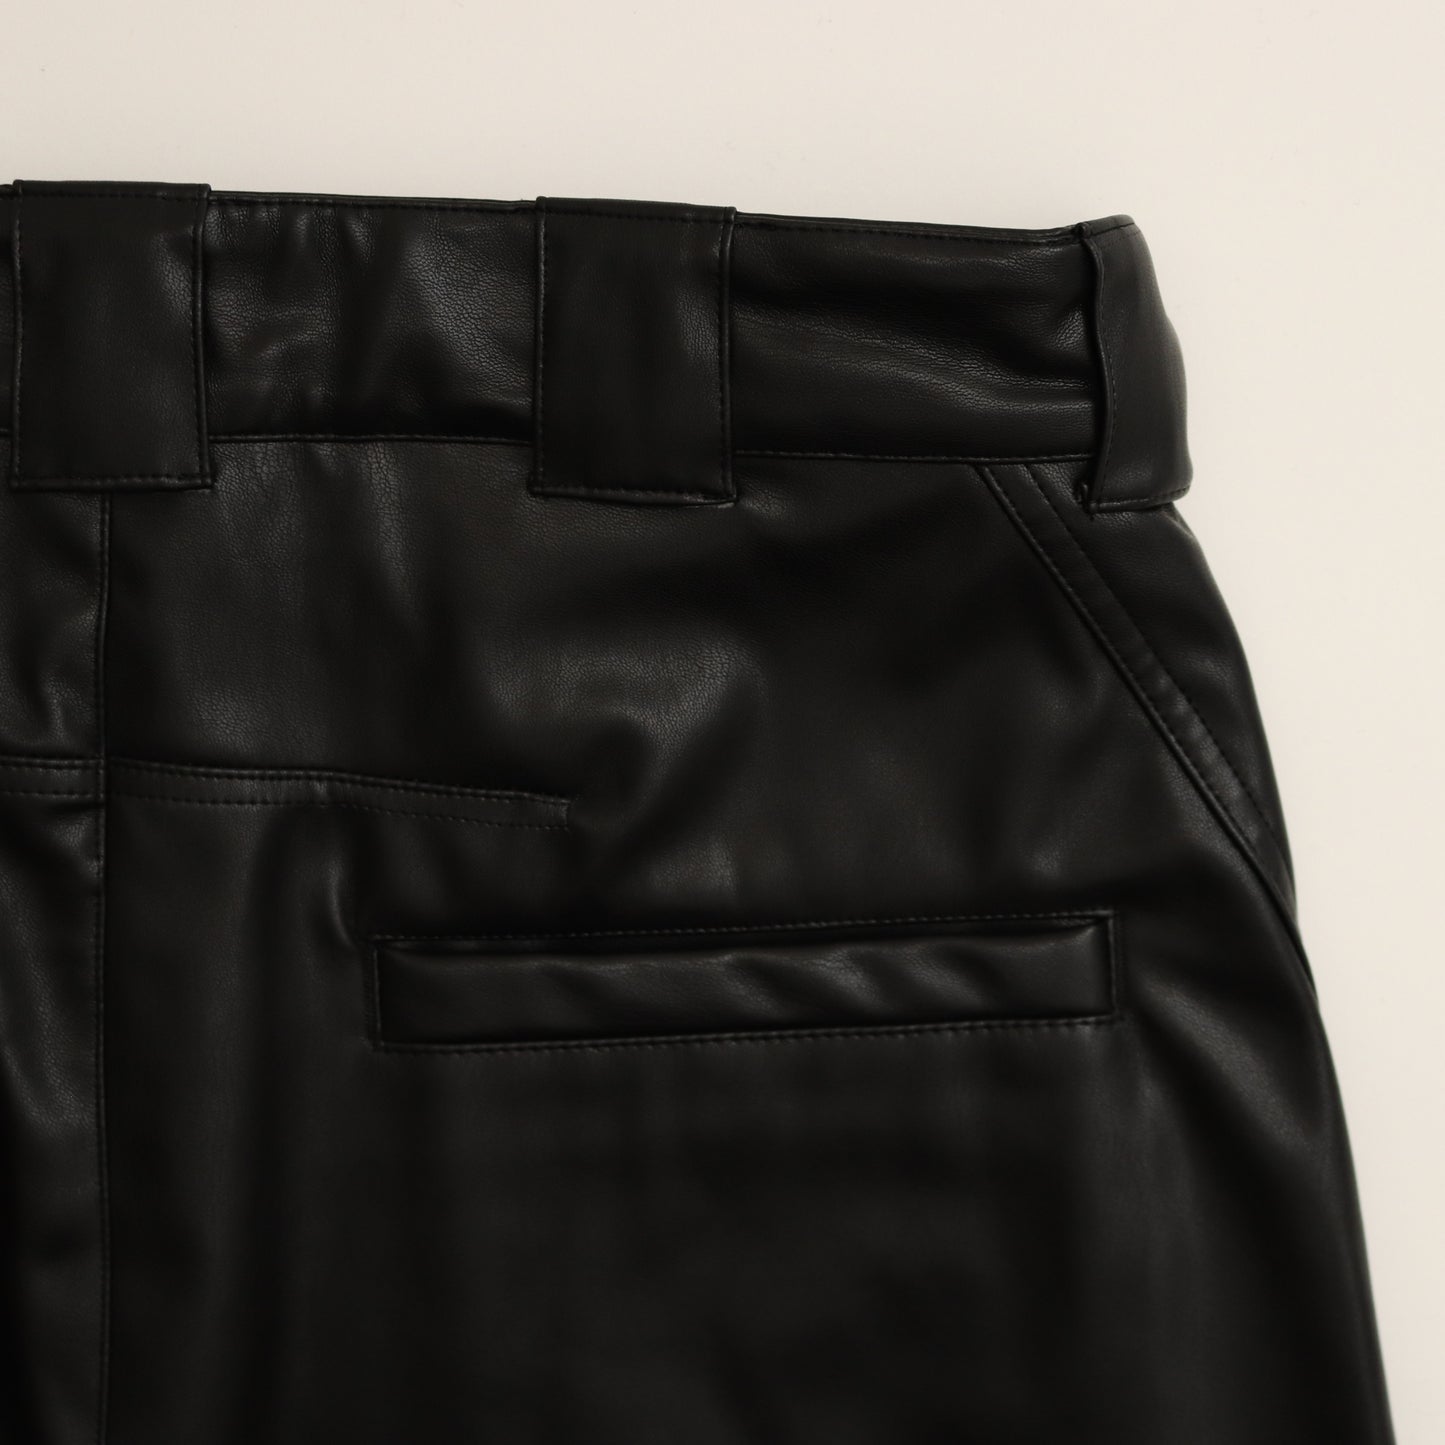 TWISTED LEATHER SHORTS #BLACK [241-01-0202L]